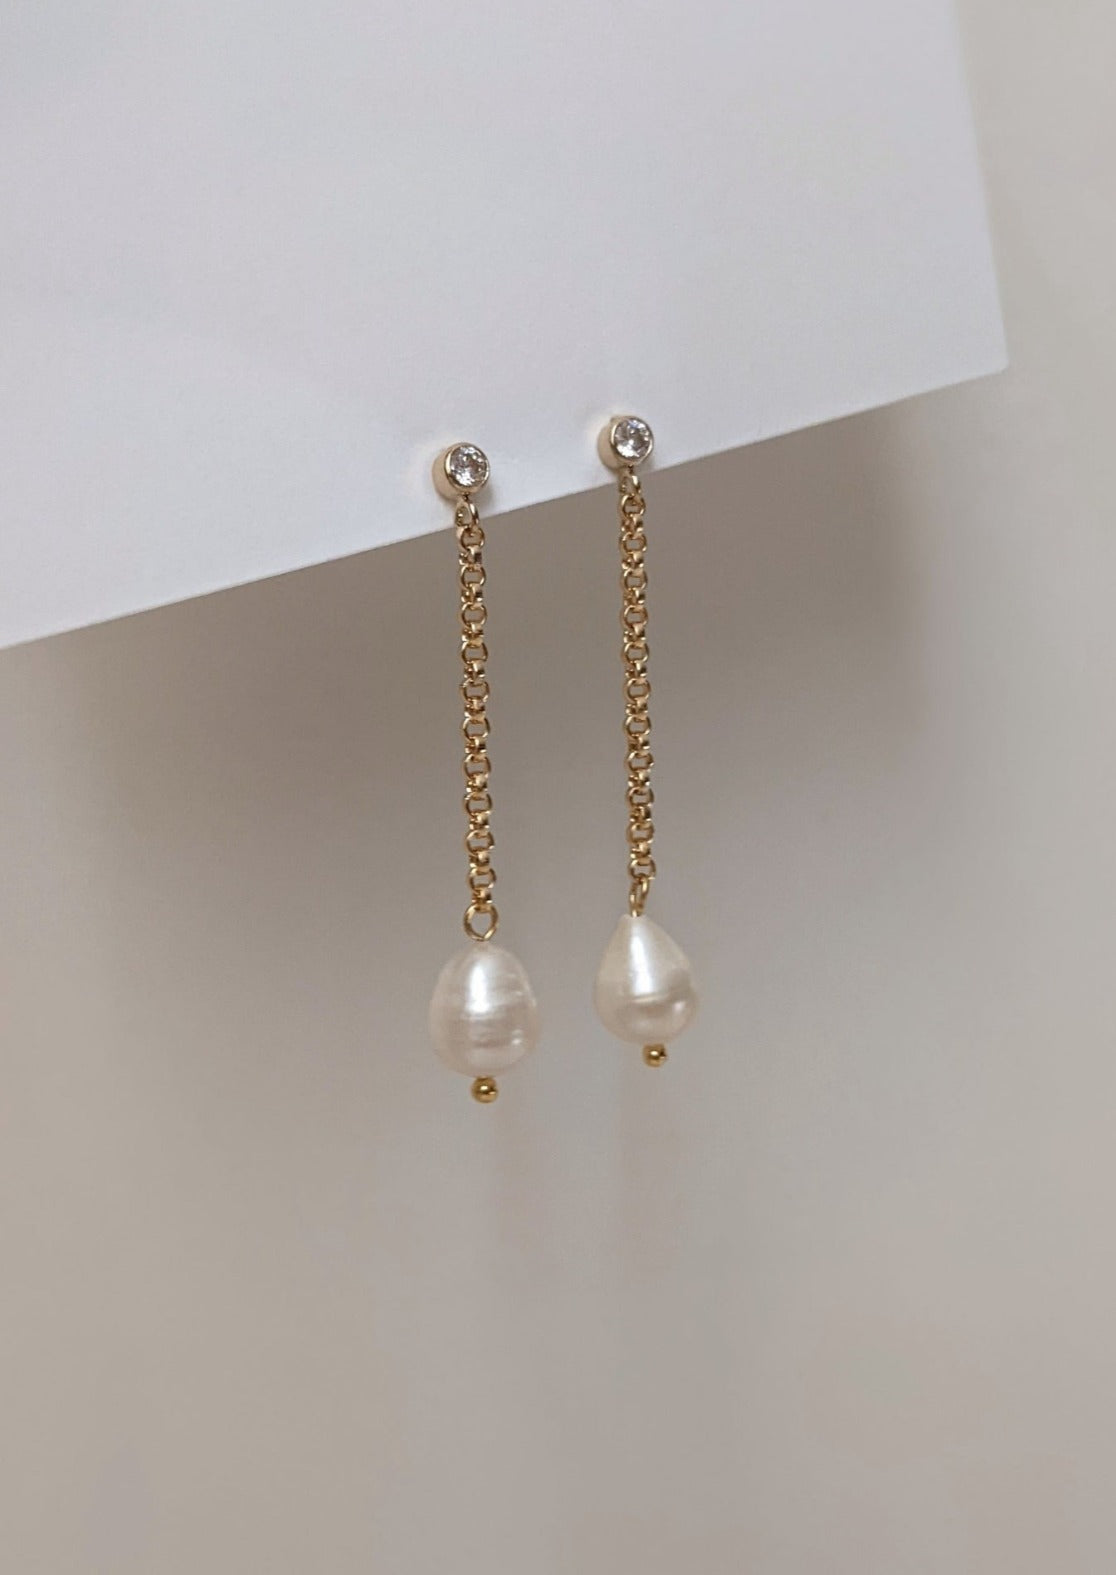 Bella Pearl Earrings by Layer the Love